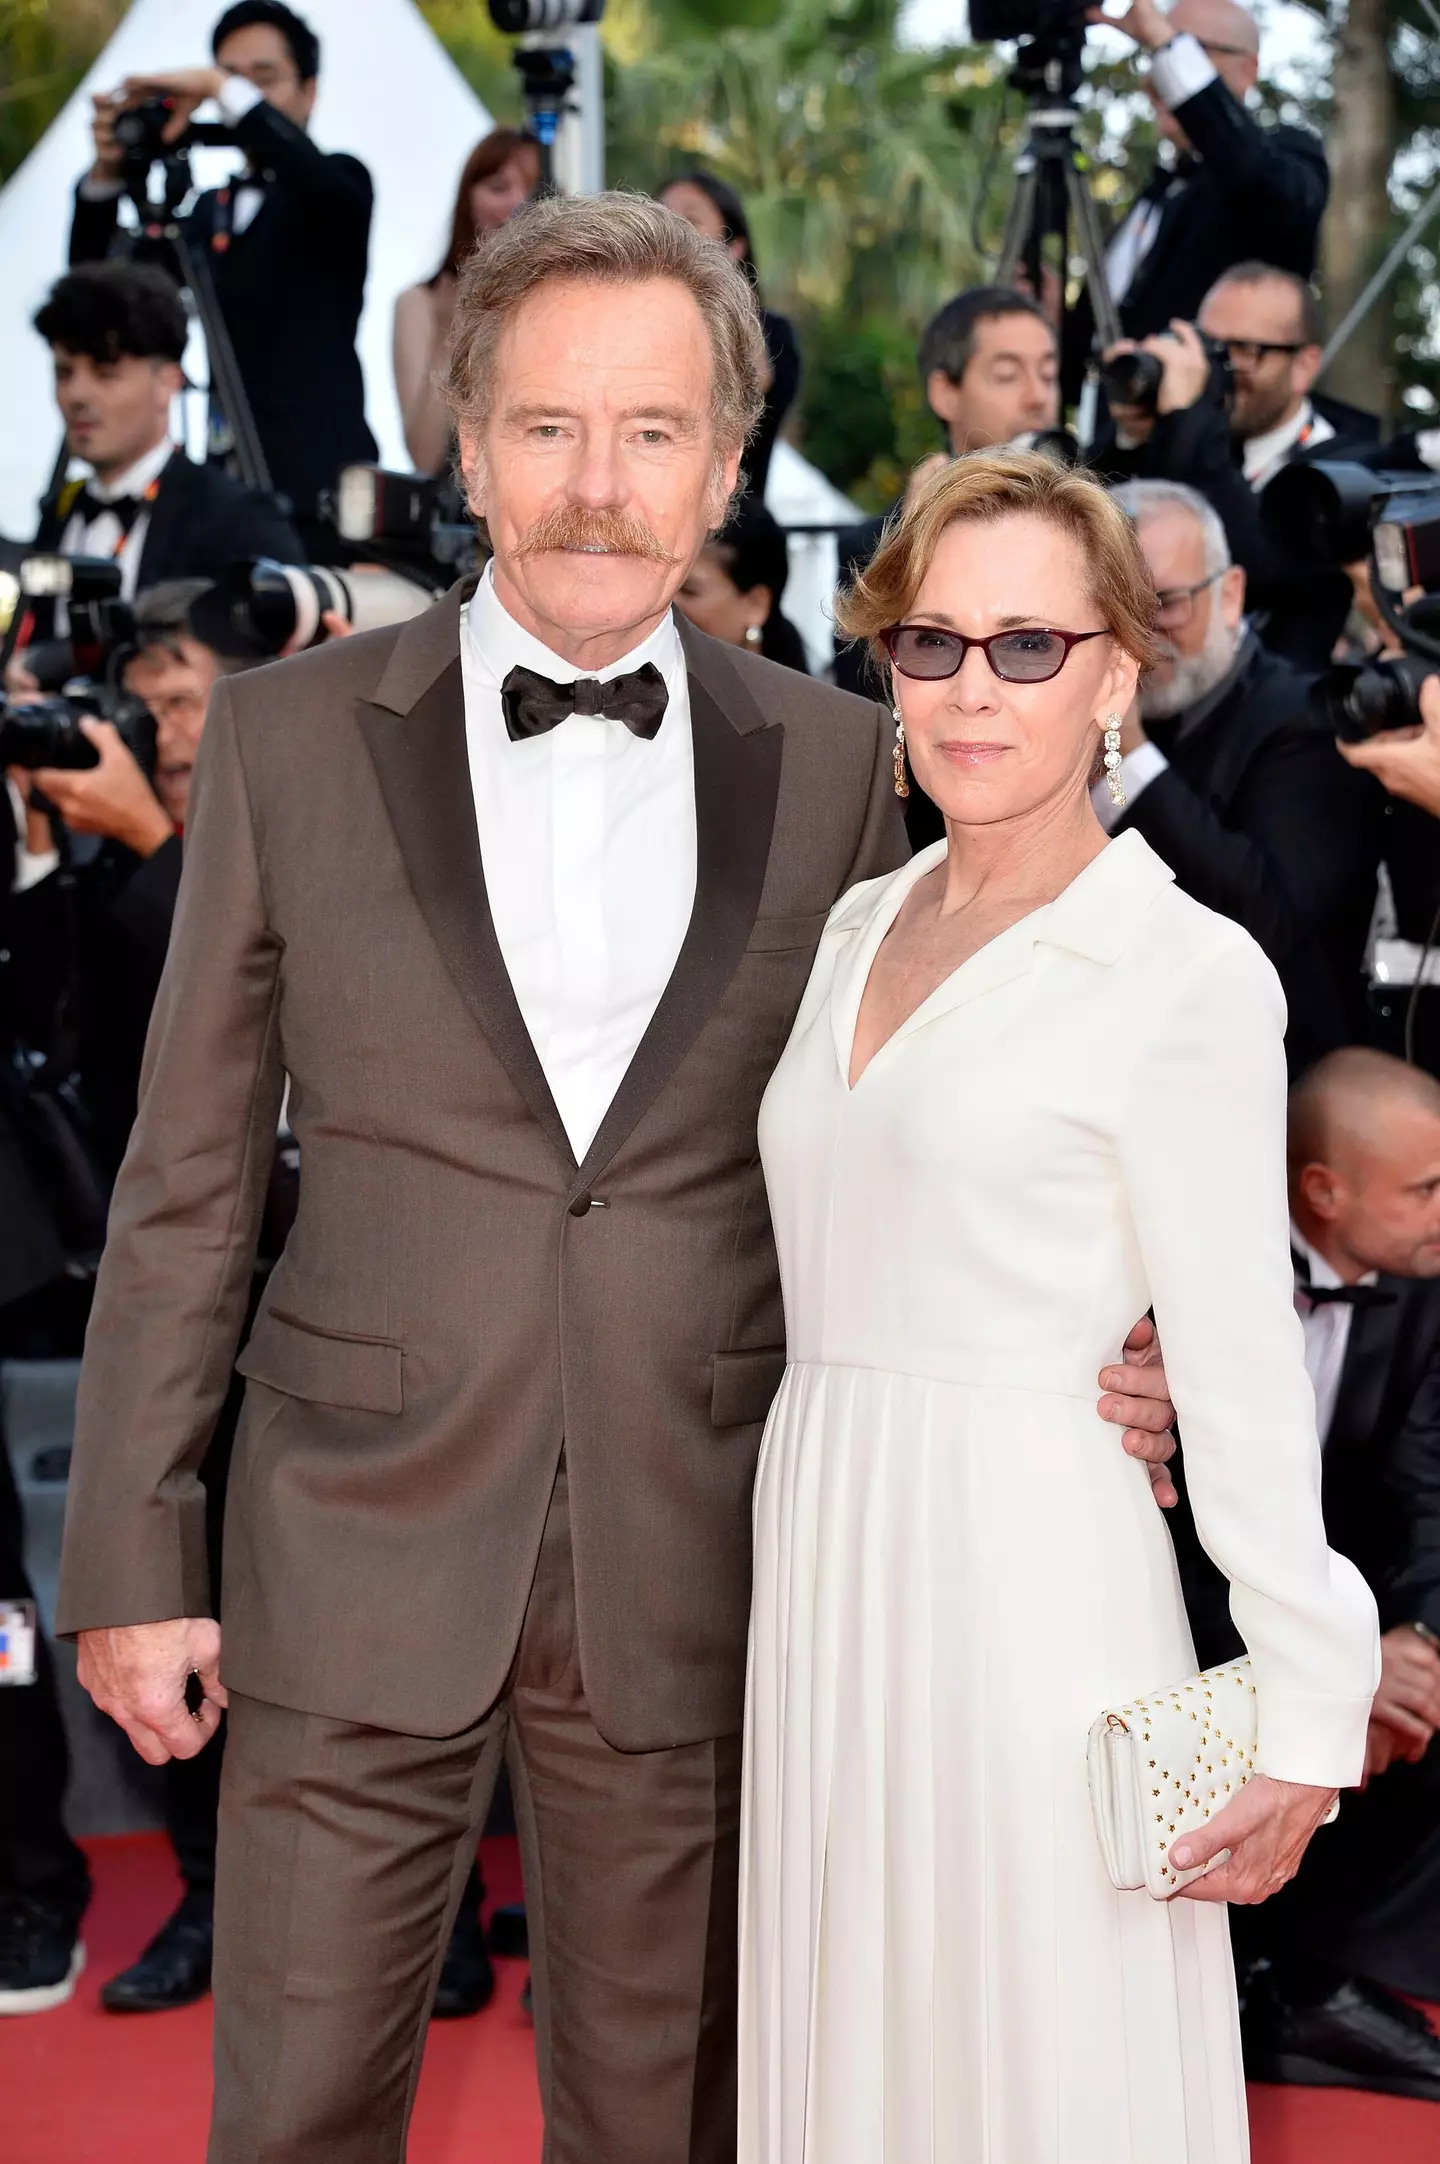 Cranston wants to move away to a small village with wife Robin.